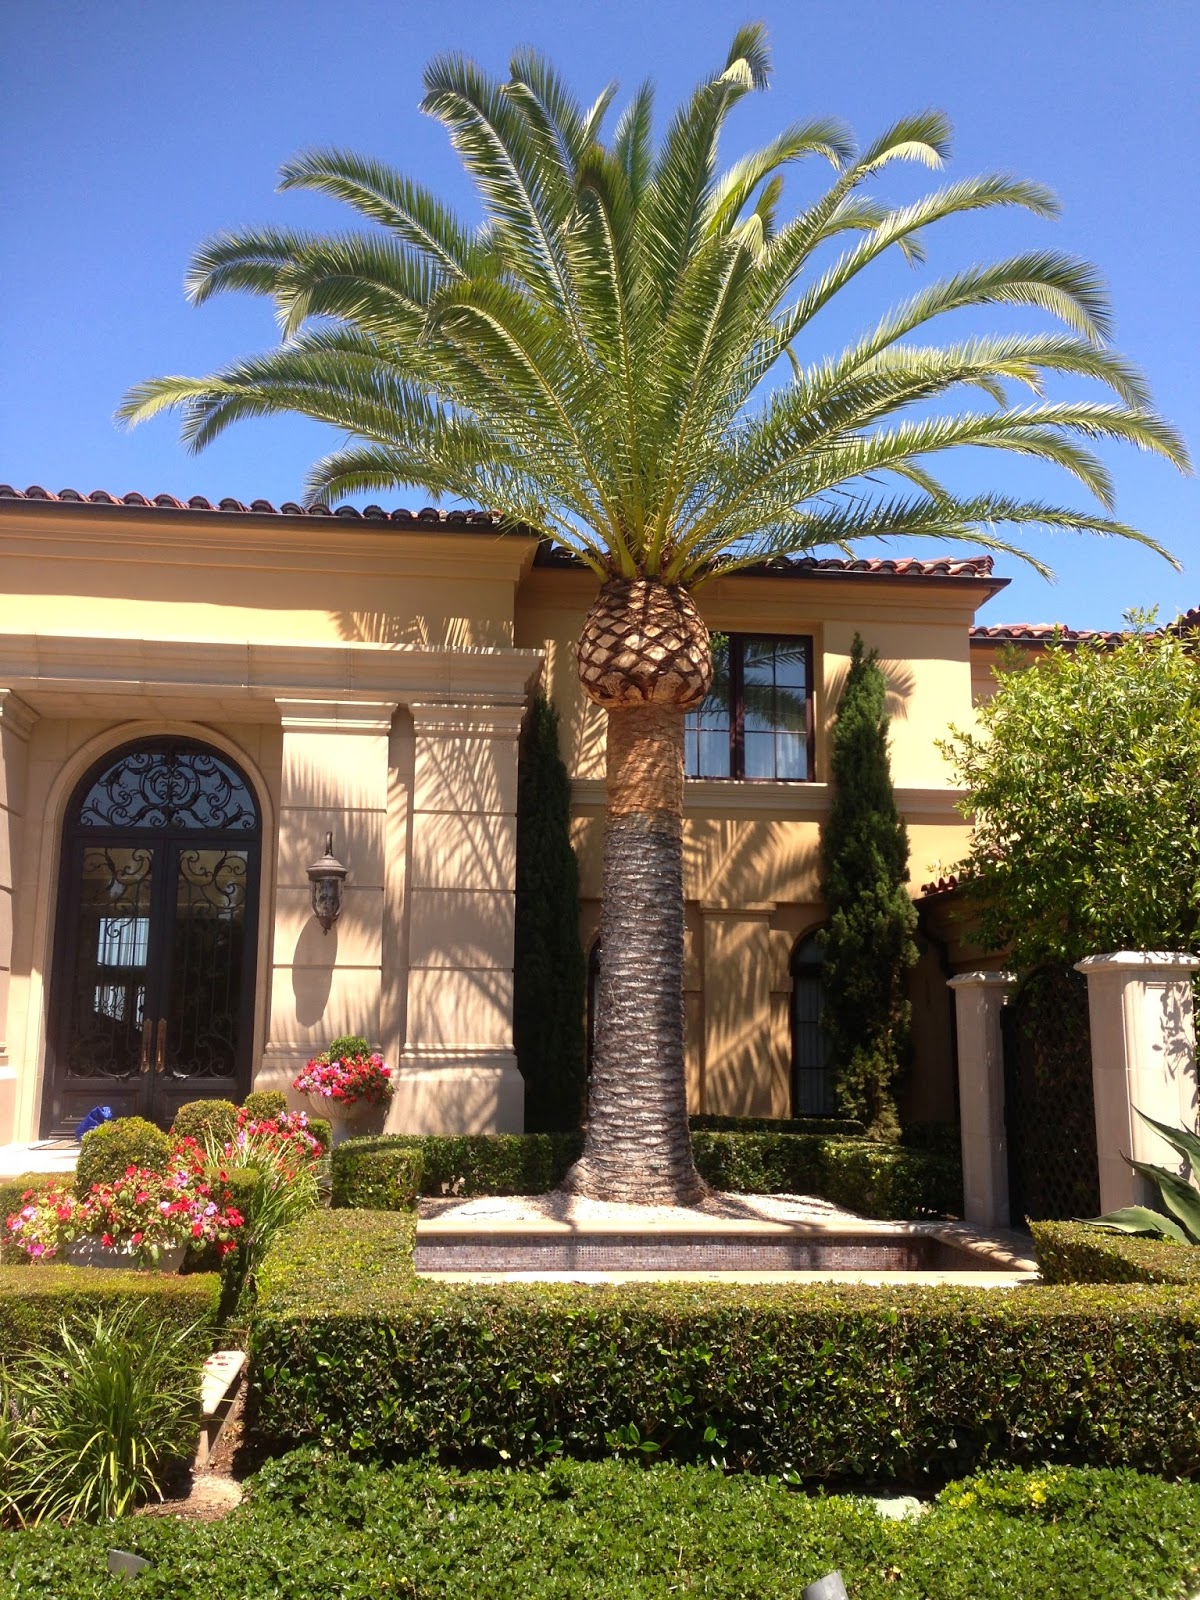 Gregory Palm Farms : GREGORY PALM FARMS! IT'S A GREAT DAY FOR NEW PALMS ...